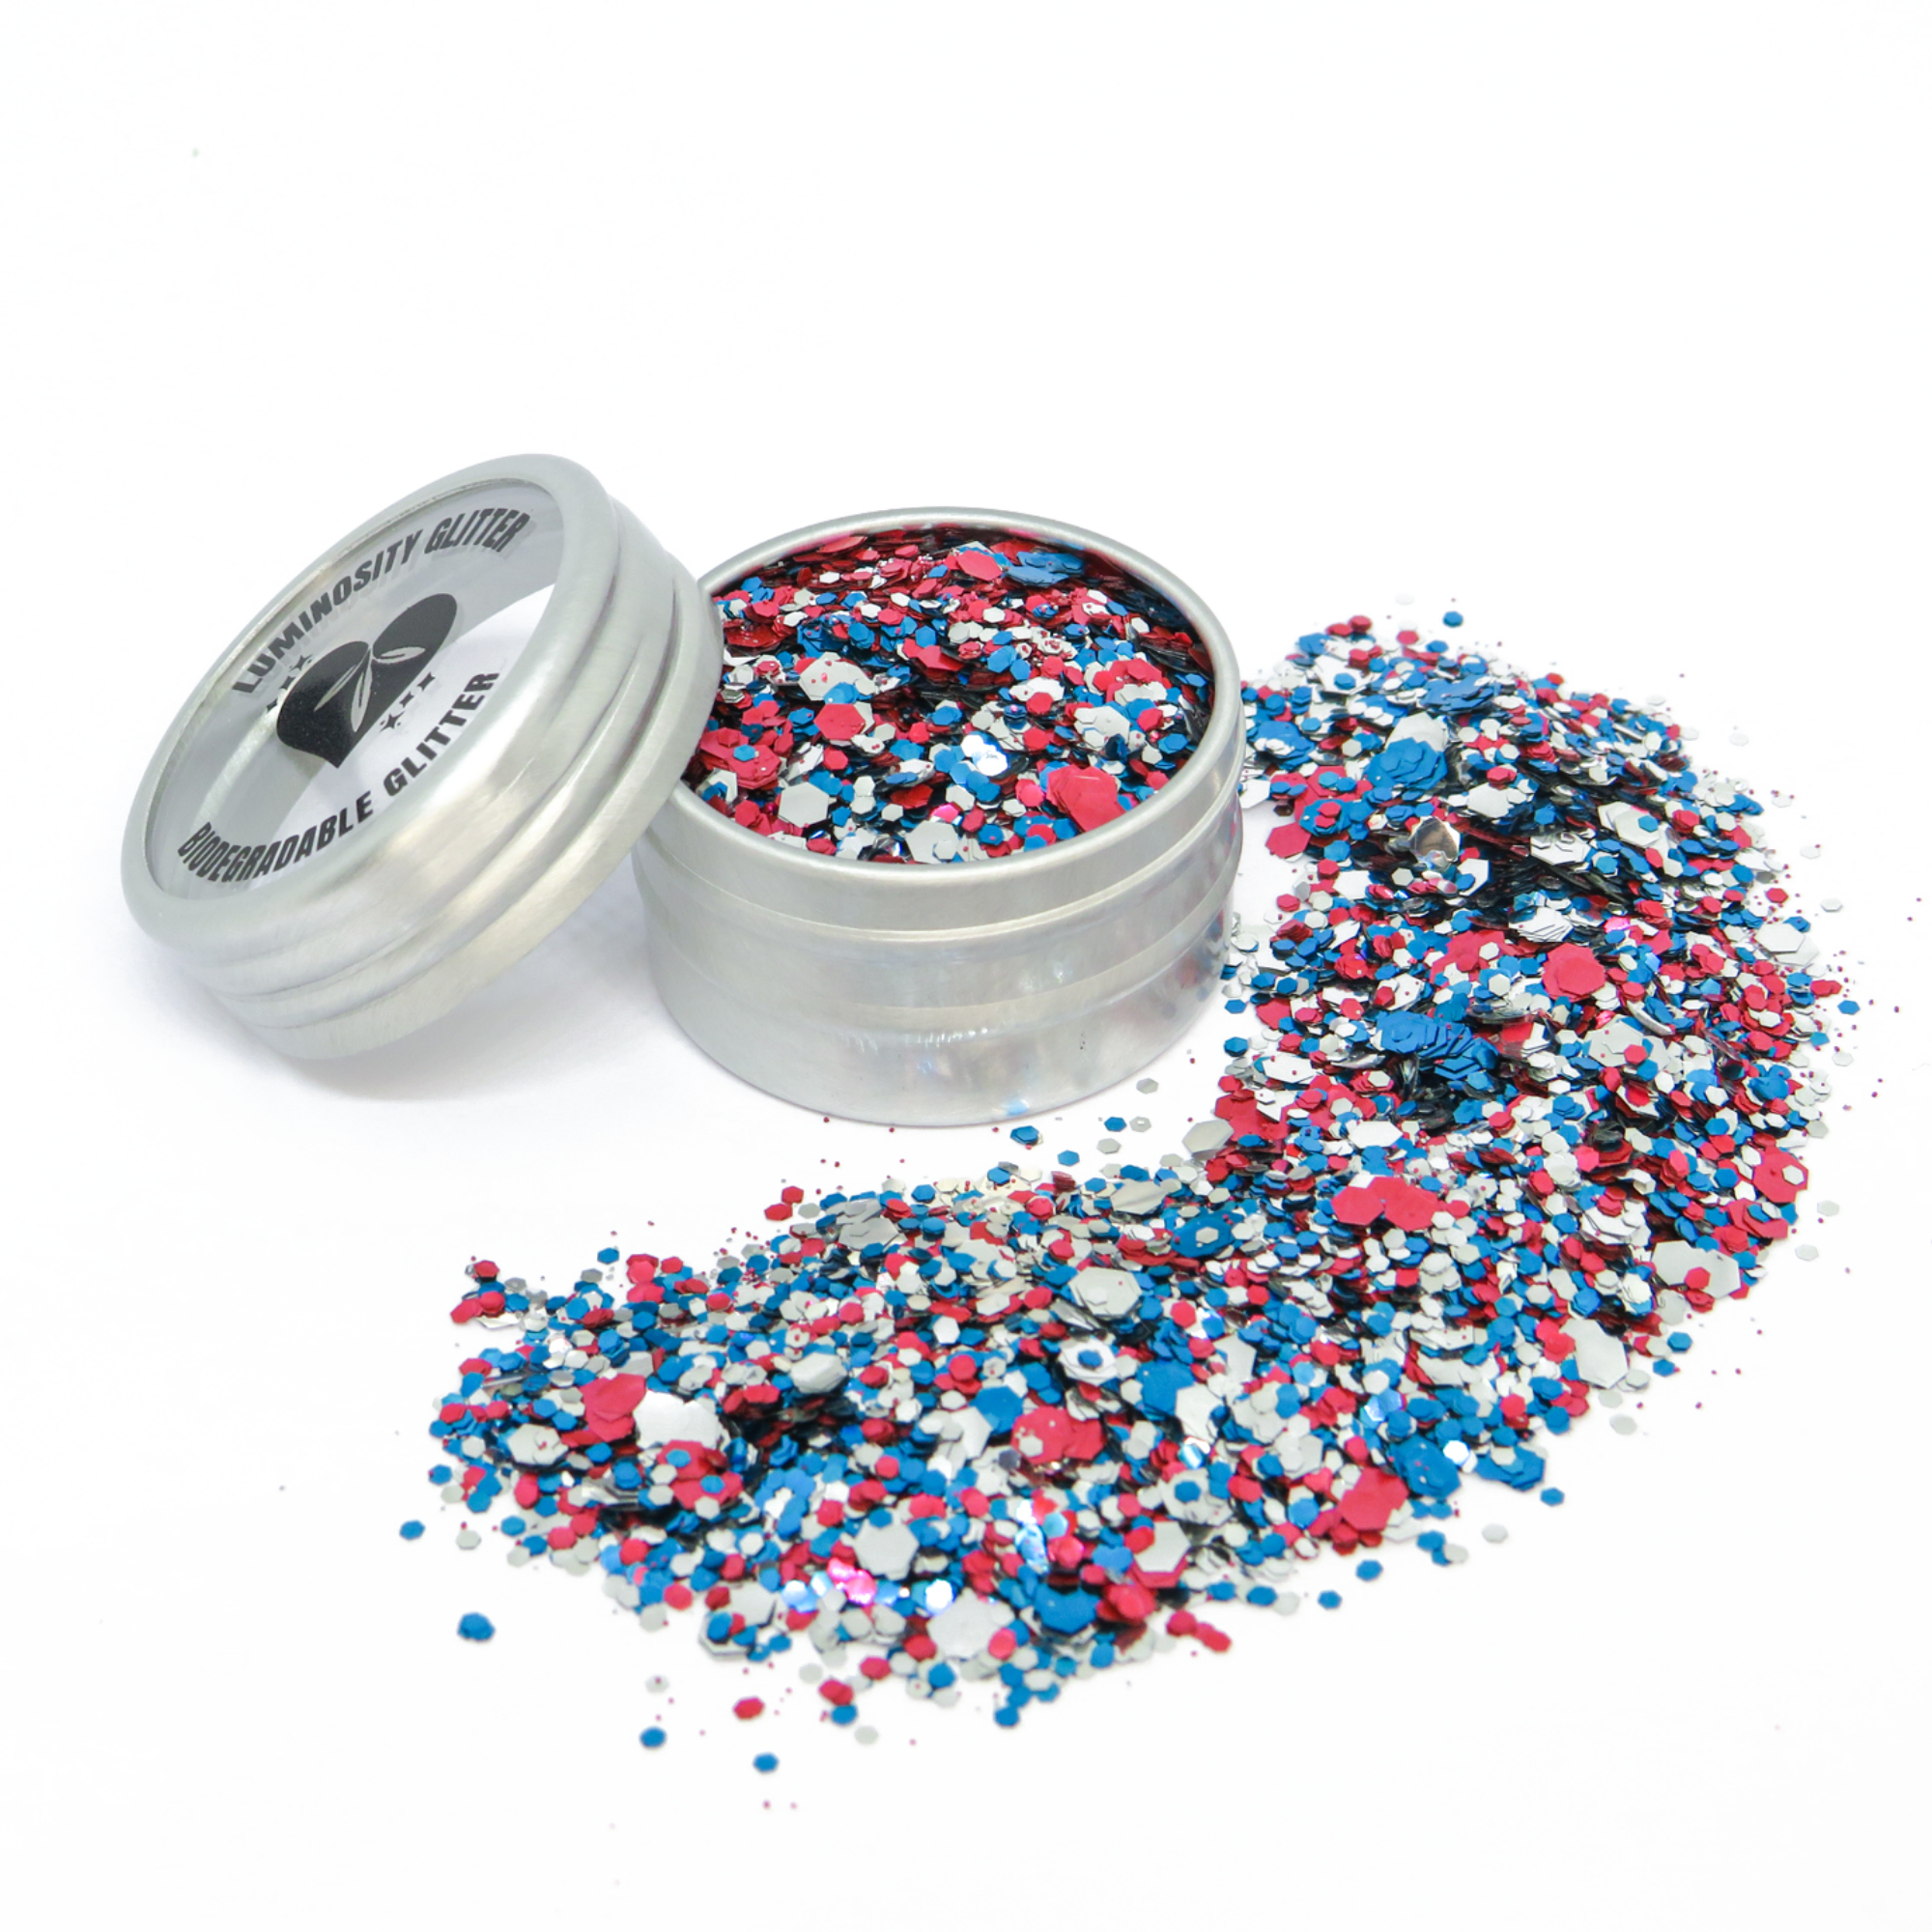 Jubilee bioglitter mix by Luminosity Glitter. Hand blended in London with red, silver and blue eco friendly glitter